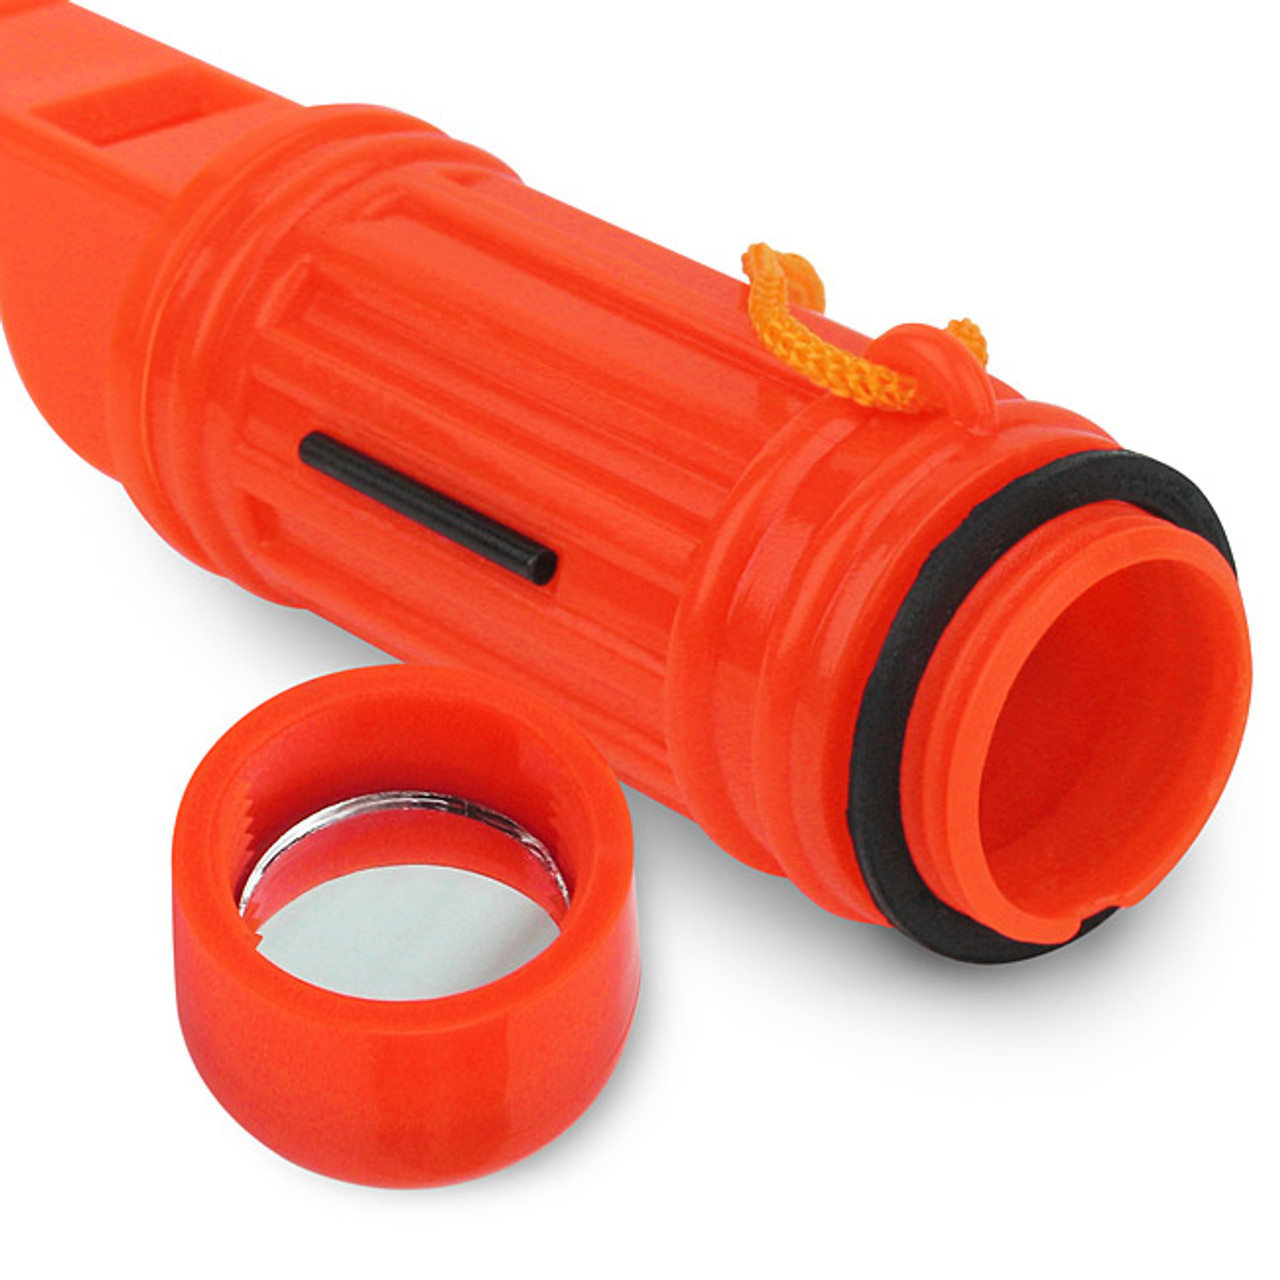 https://cdn11.bigcommerce.com/s-tumf4kk1l4/images/stencil/1280x1280/products/3172/5828/5-in-1-survival-whistle-with-compass-and-waterproof-container-13__81280.1640715075.jpg?c=1?imbypass=on